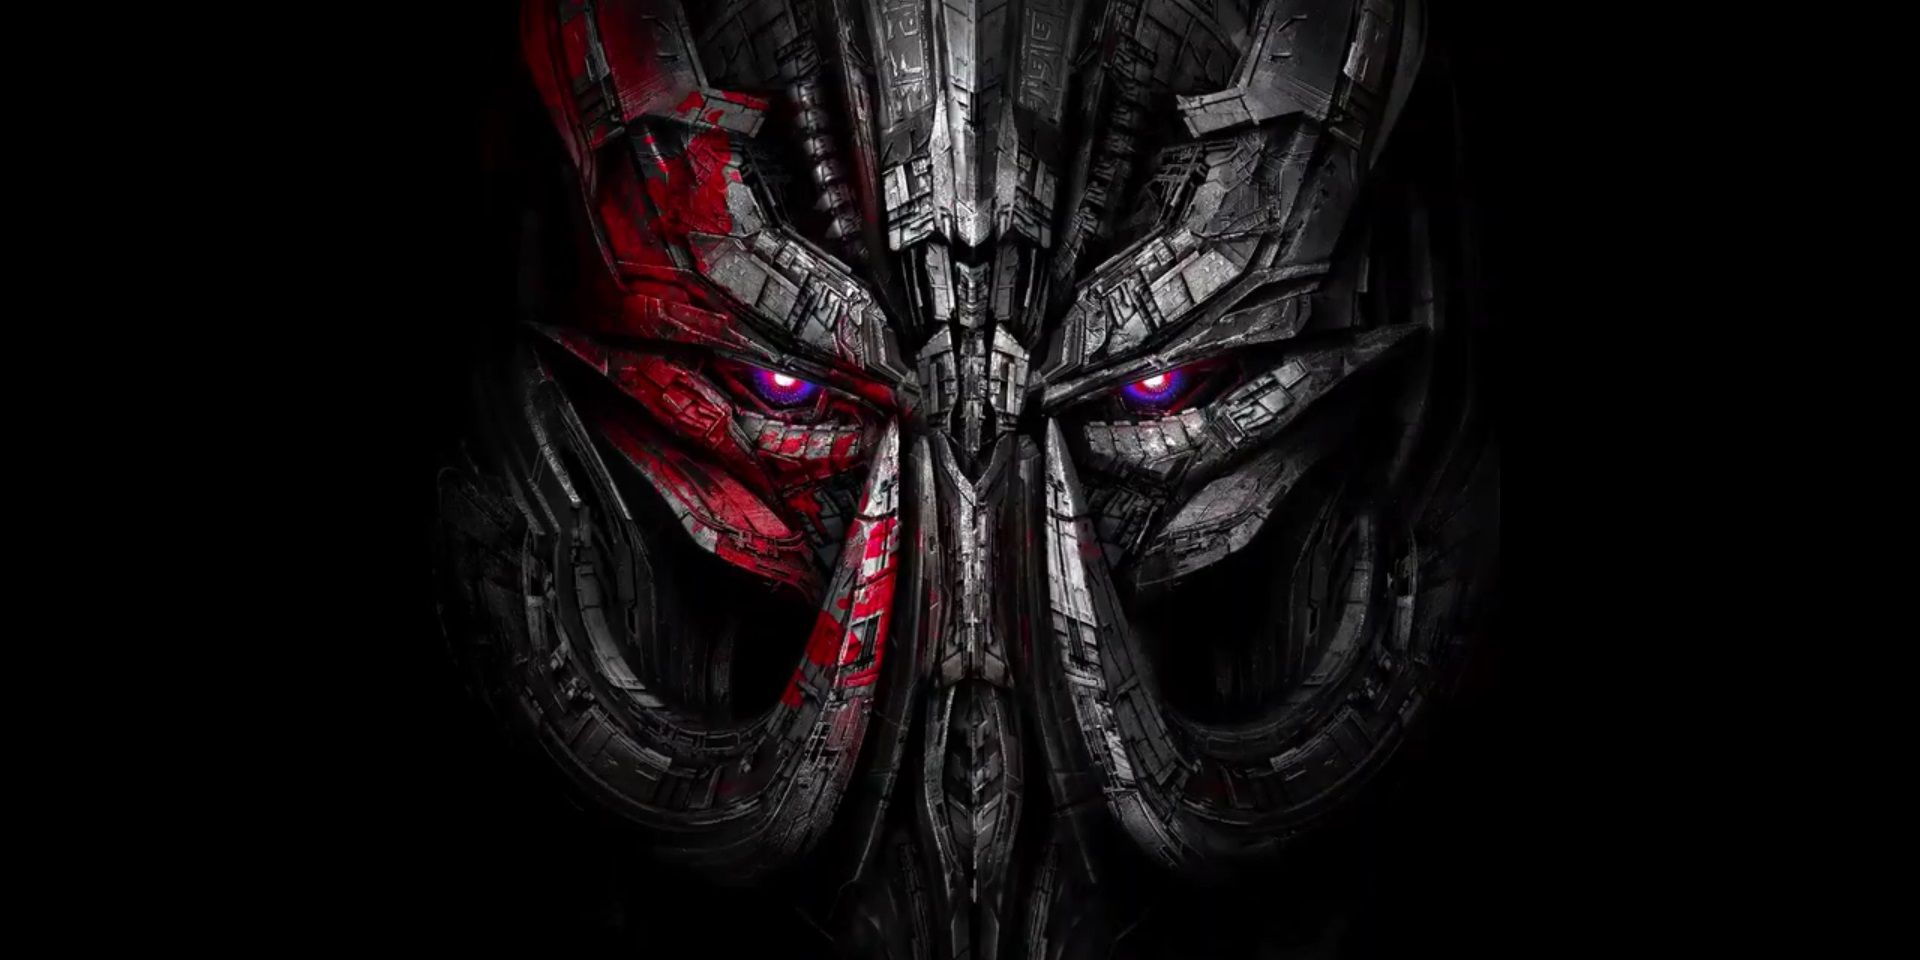 Megatron in Transformers The Last Knight